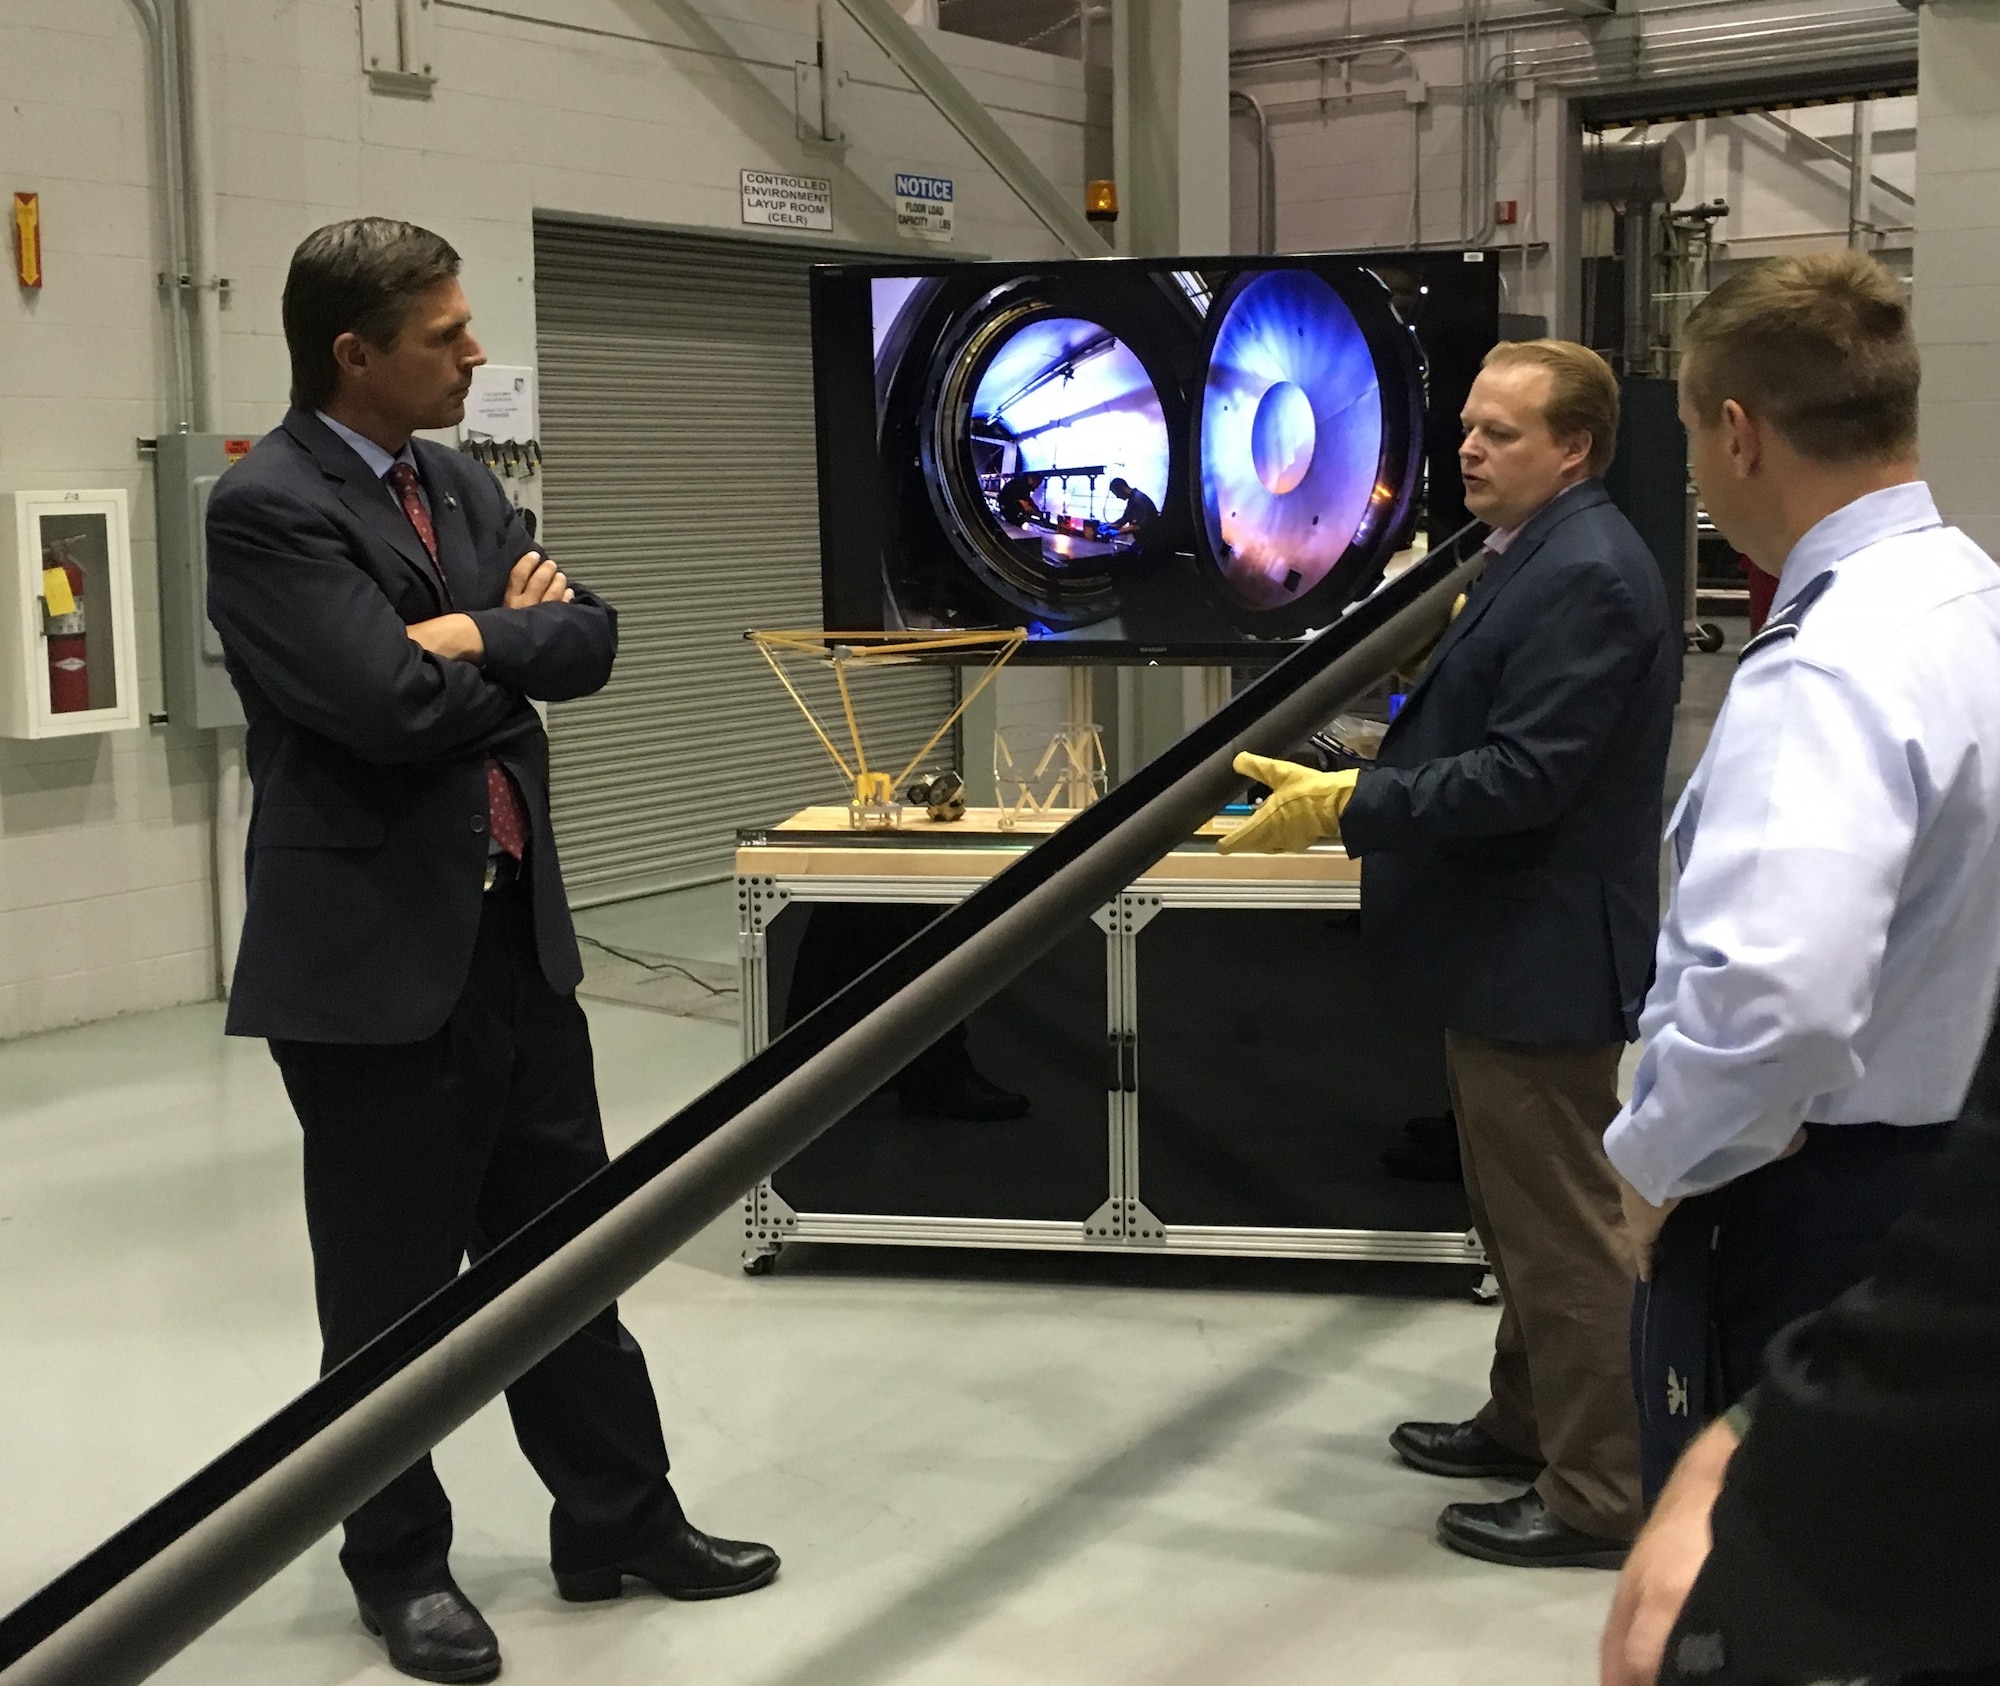 Dr. Andy Williams, center, Air Force Research Laboratory Deputy Technology Executive Officer for Space Science & Technology, explains the engineering of the Roll-Out-Solar Array, or ROSA, to U.S. Senator Martin Heinrich during a past visit to AFRL’s Space Vehicles Directorate at Kirtland Air Force Base, New Mexico. (Courtesy photo)